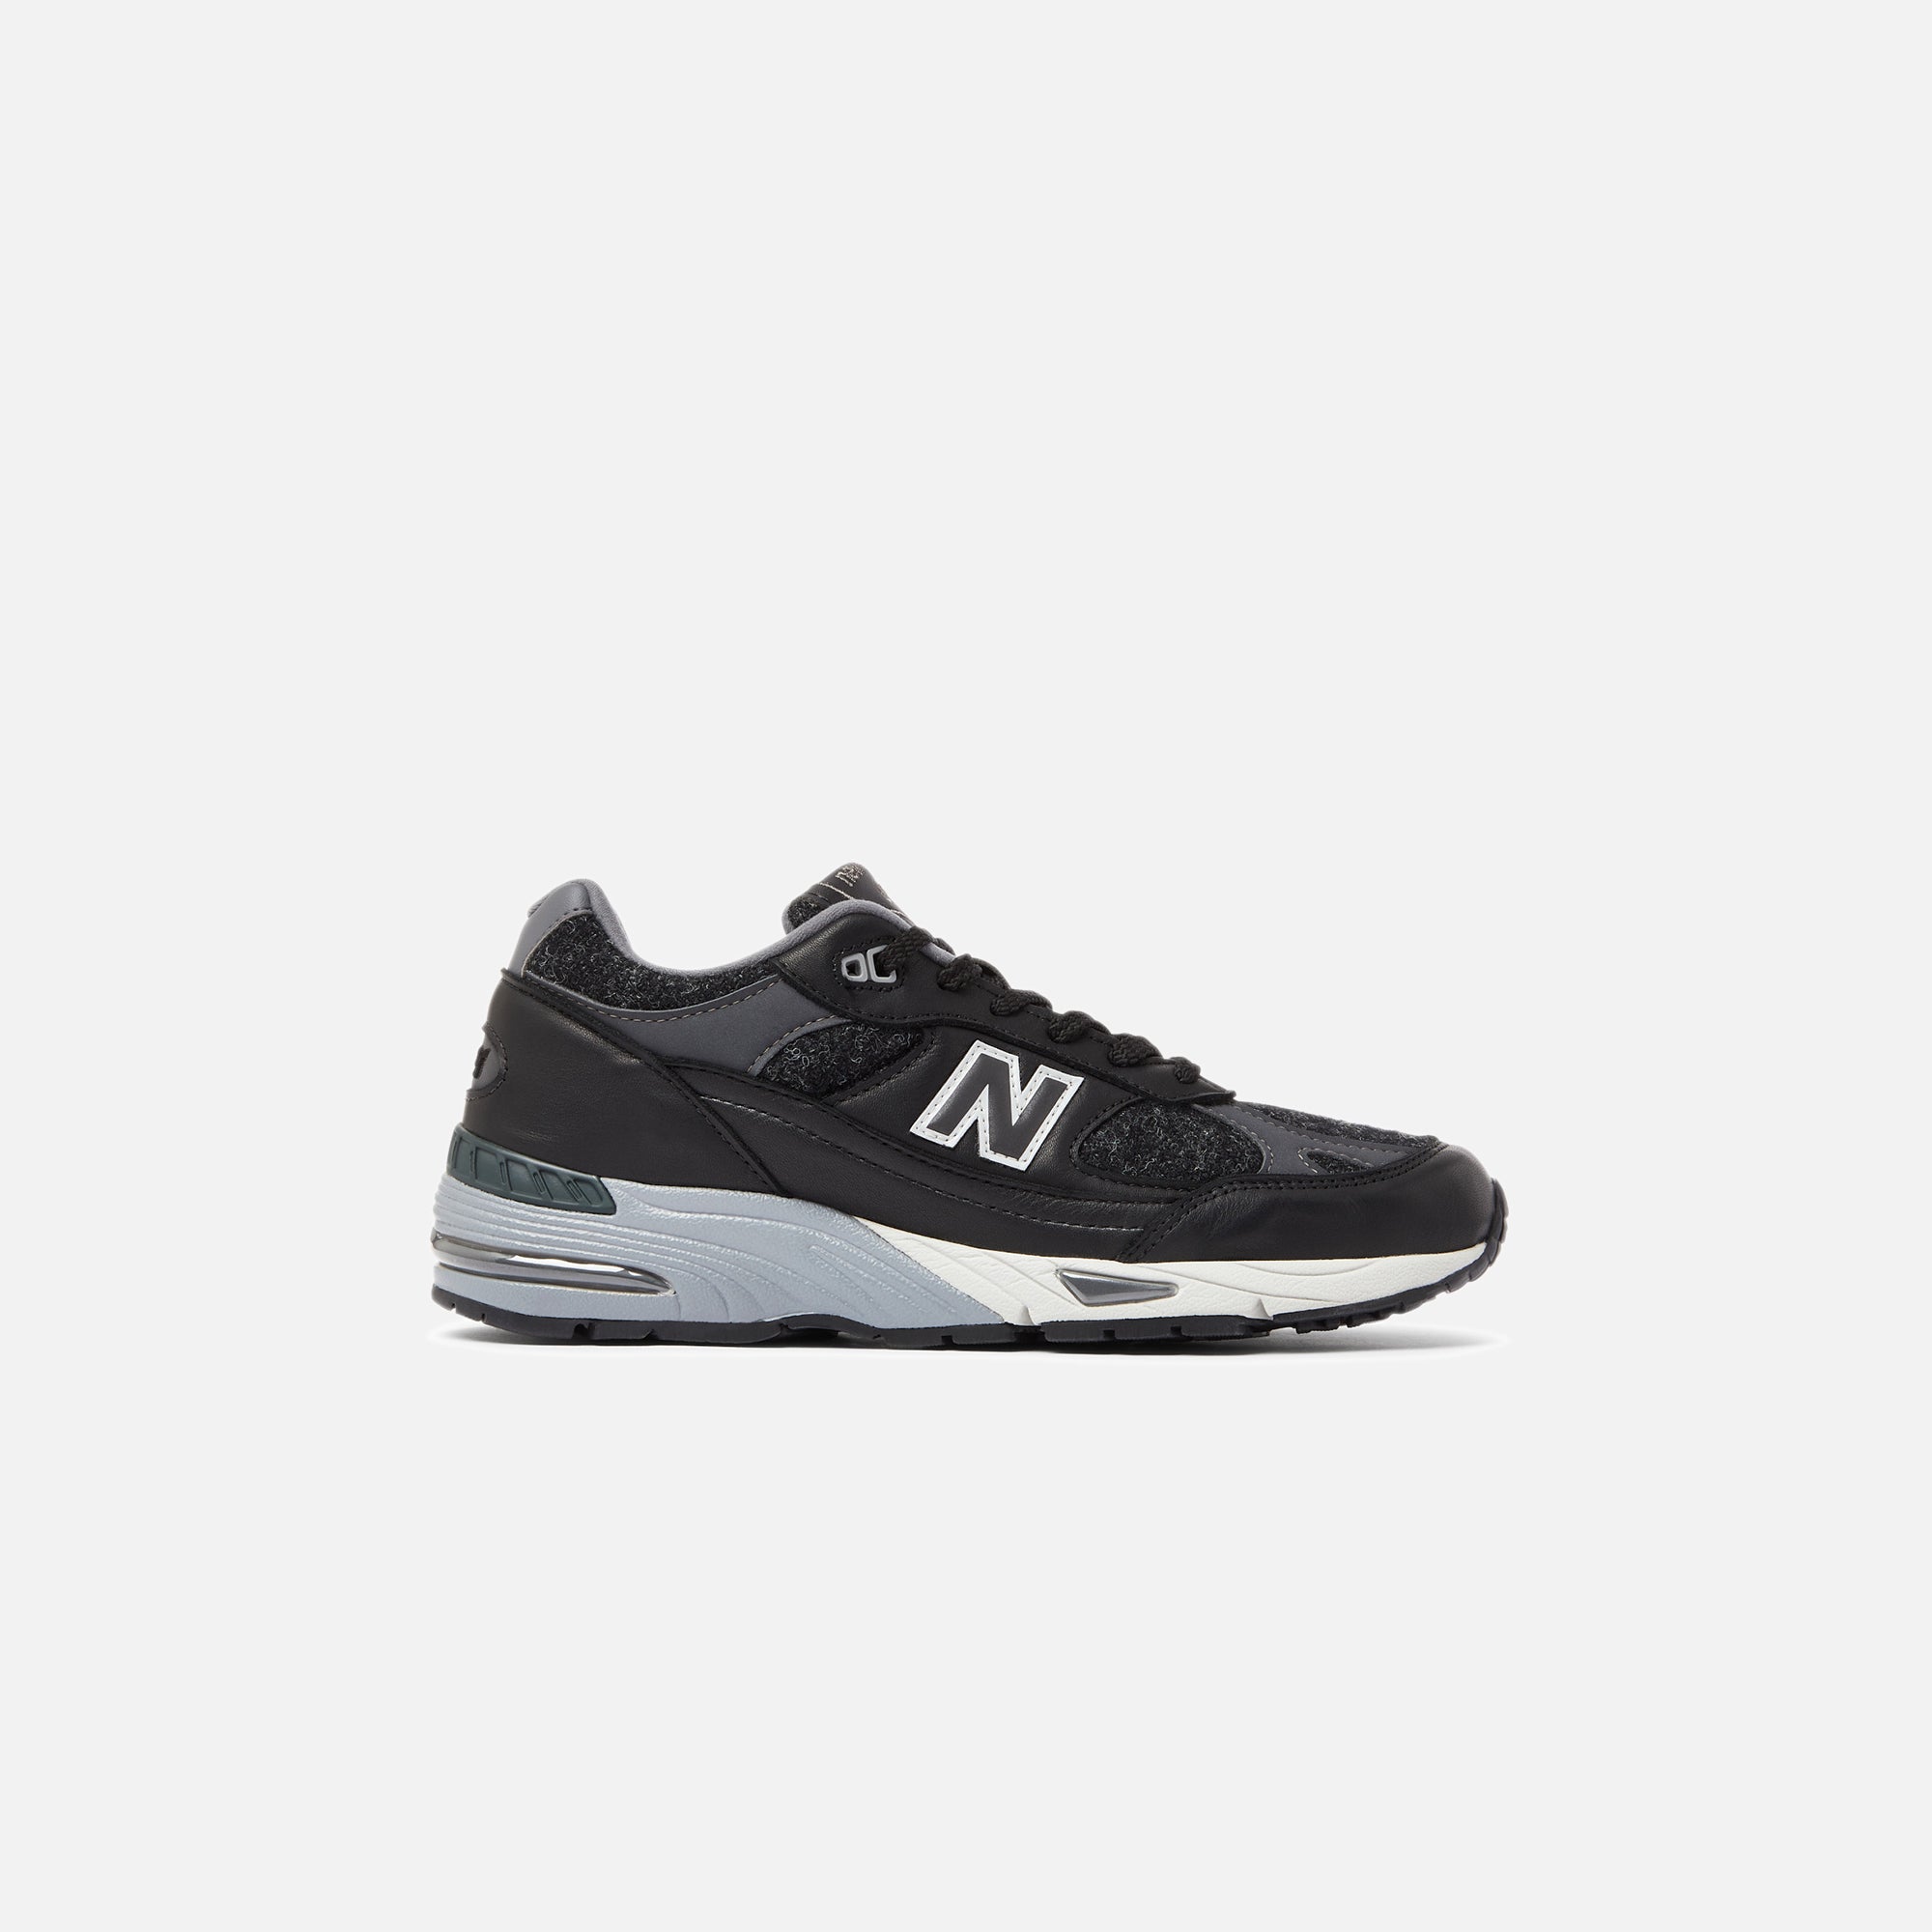 New Balance Made in UK 991 - Black / Magnet / Smoked Pearl